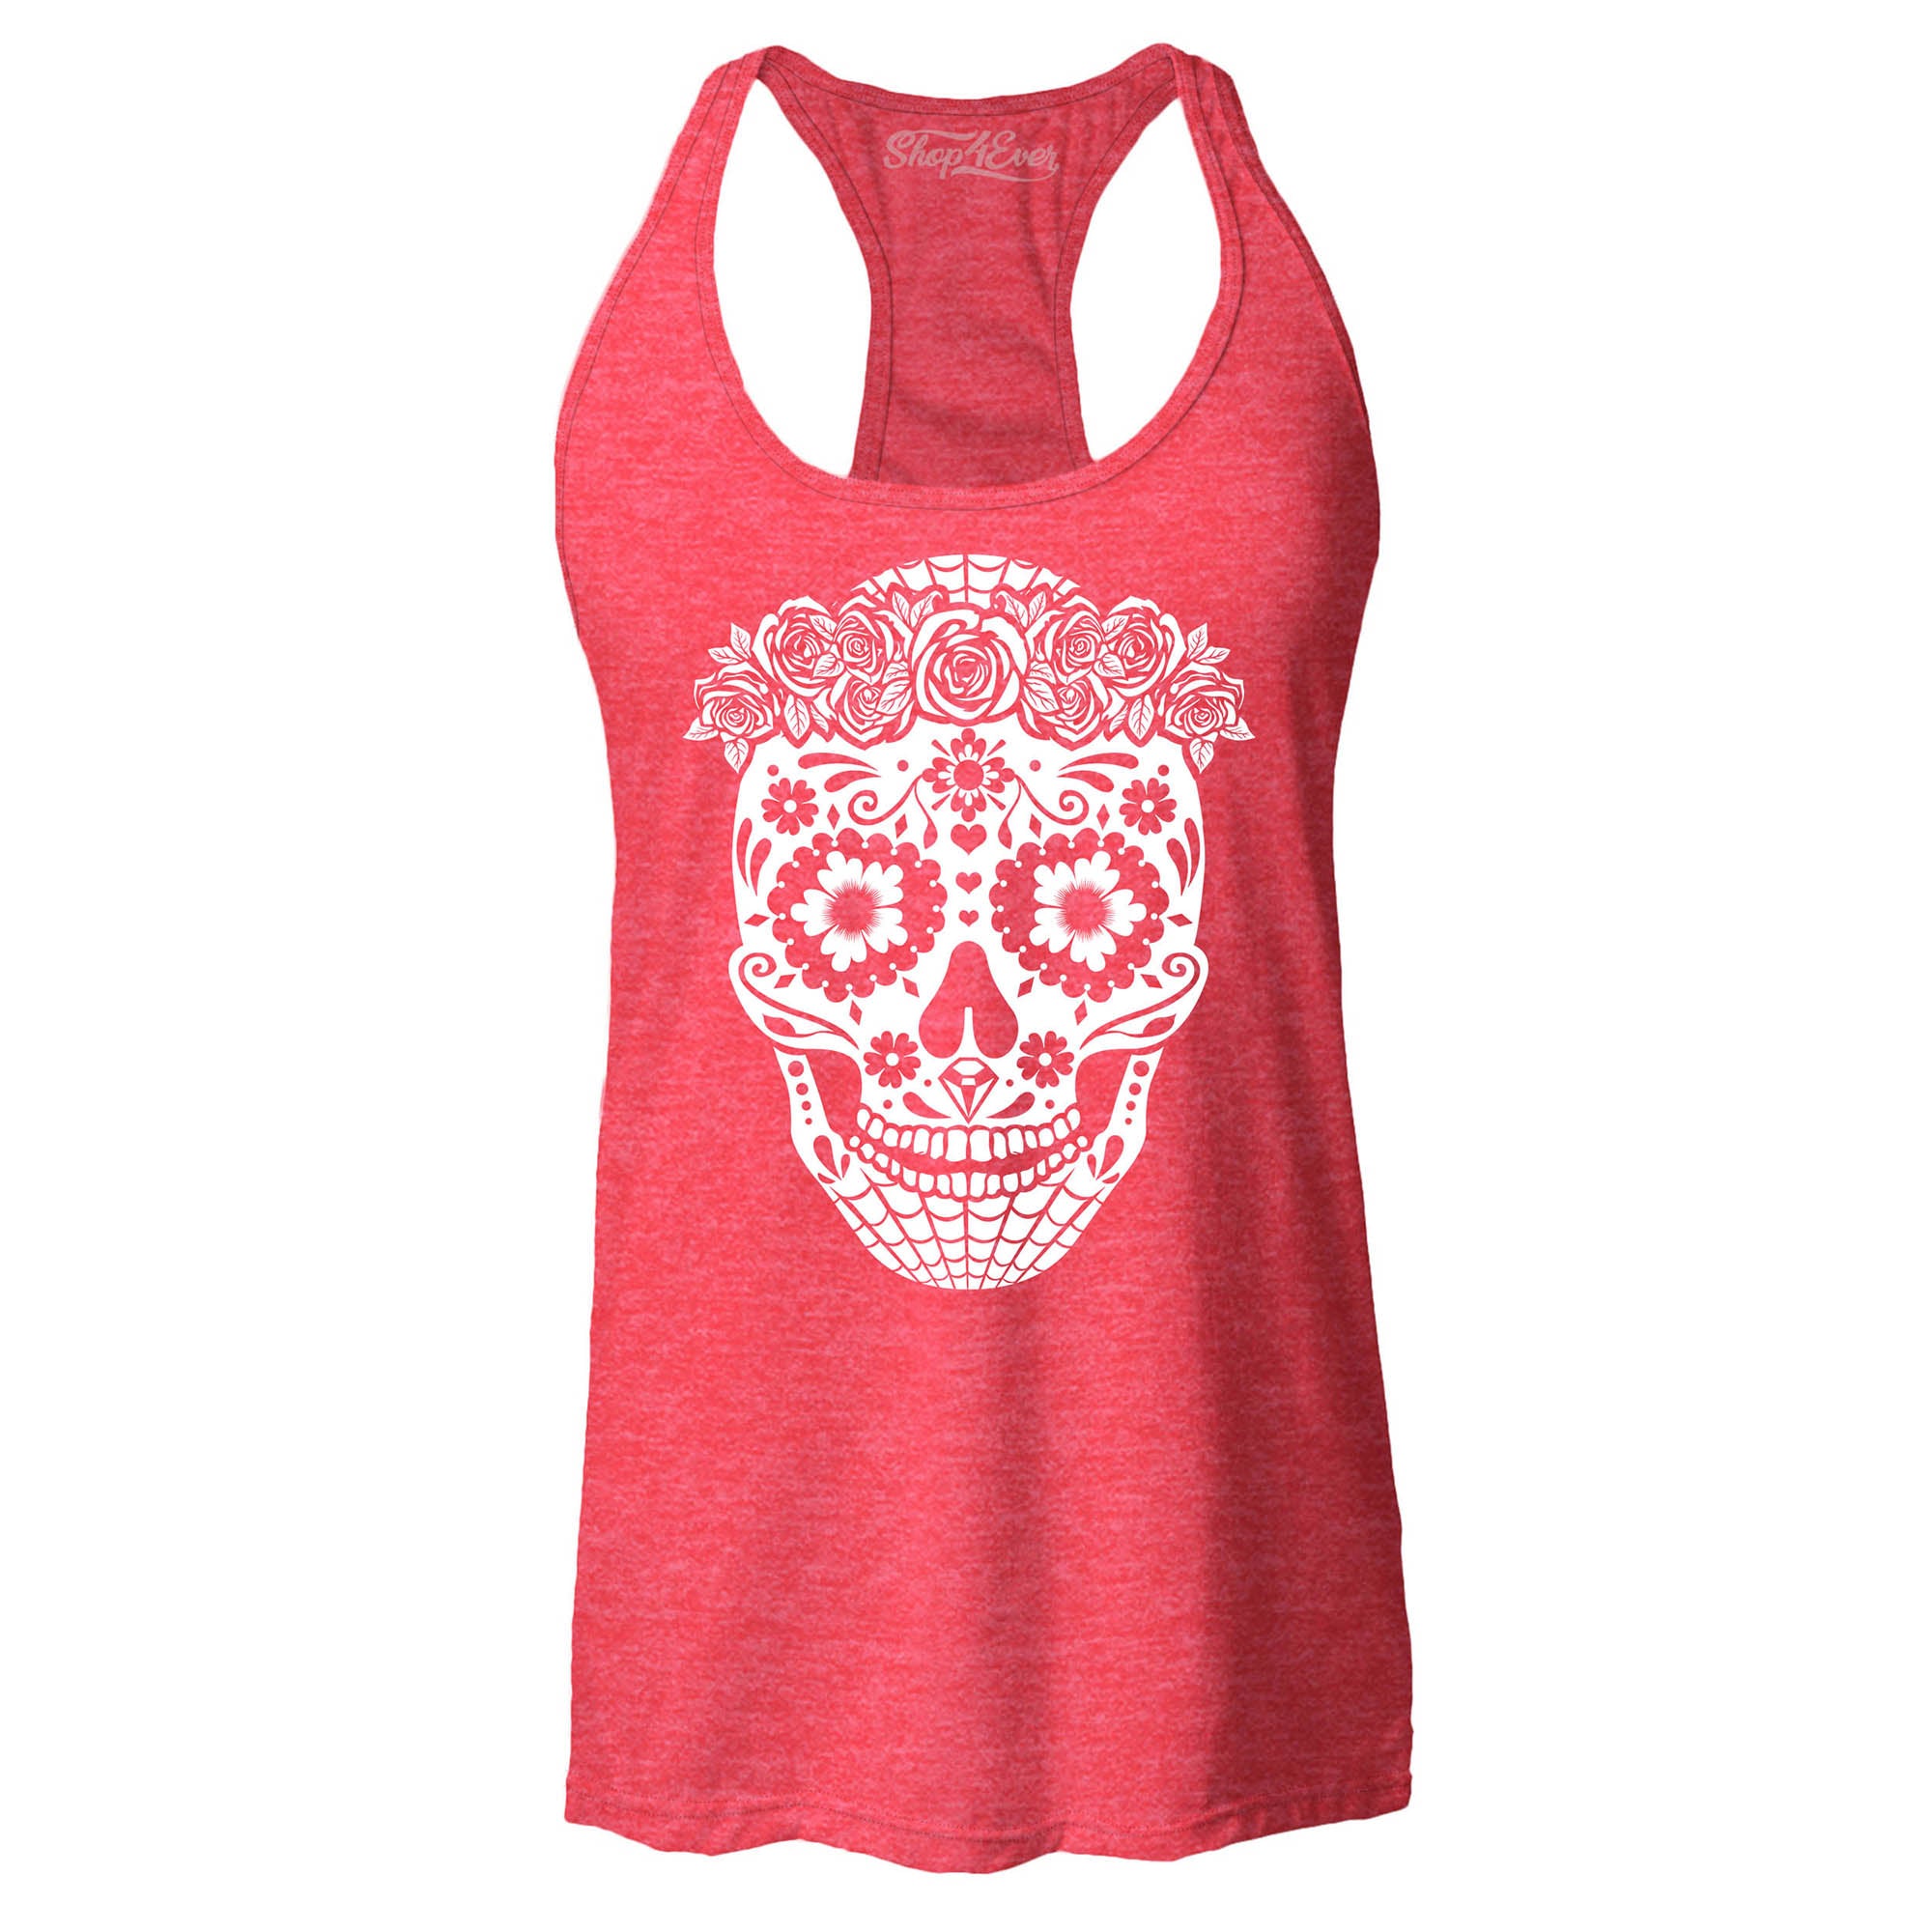 Floral Day of The Dead Girl Skull Women's Racerback Tank Top Slim Fit